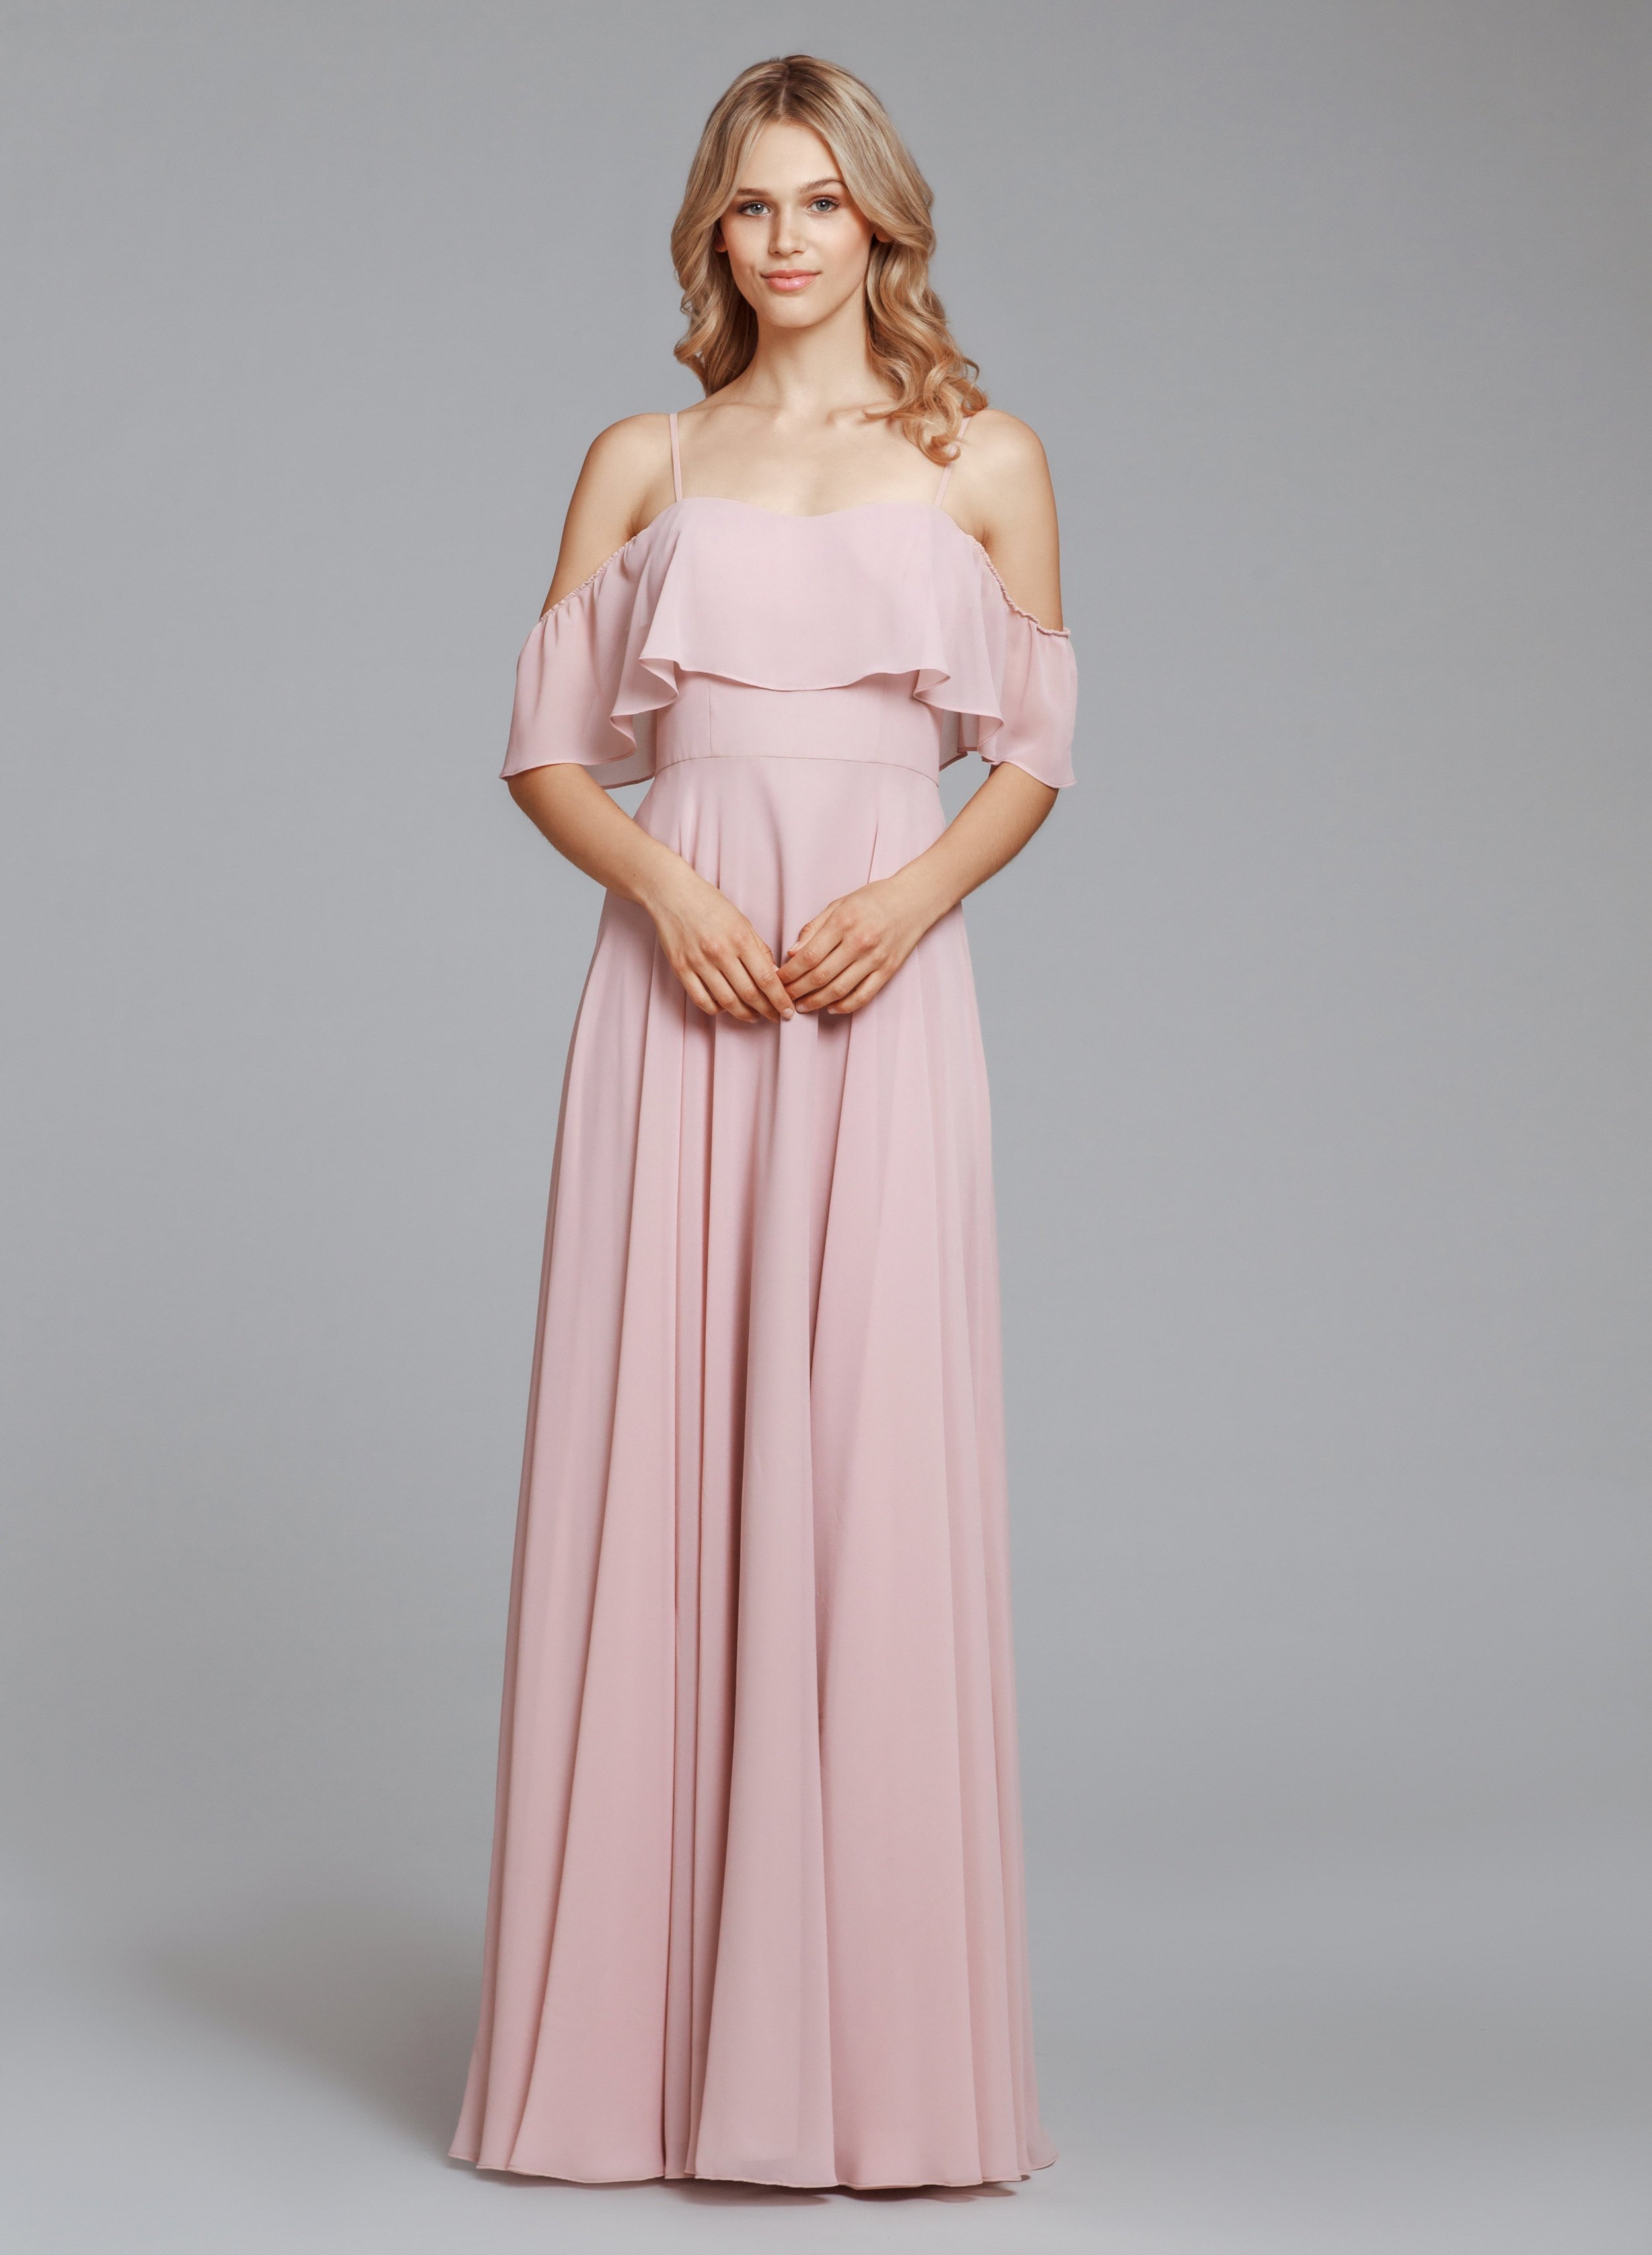 hayley-paige-occasions-bridesmaids-fall-2018-style-5854.jpg